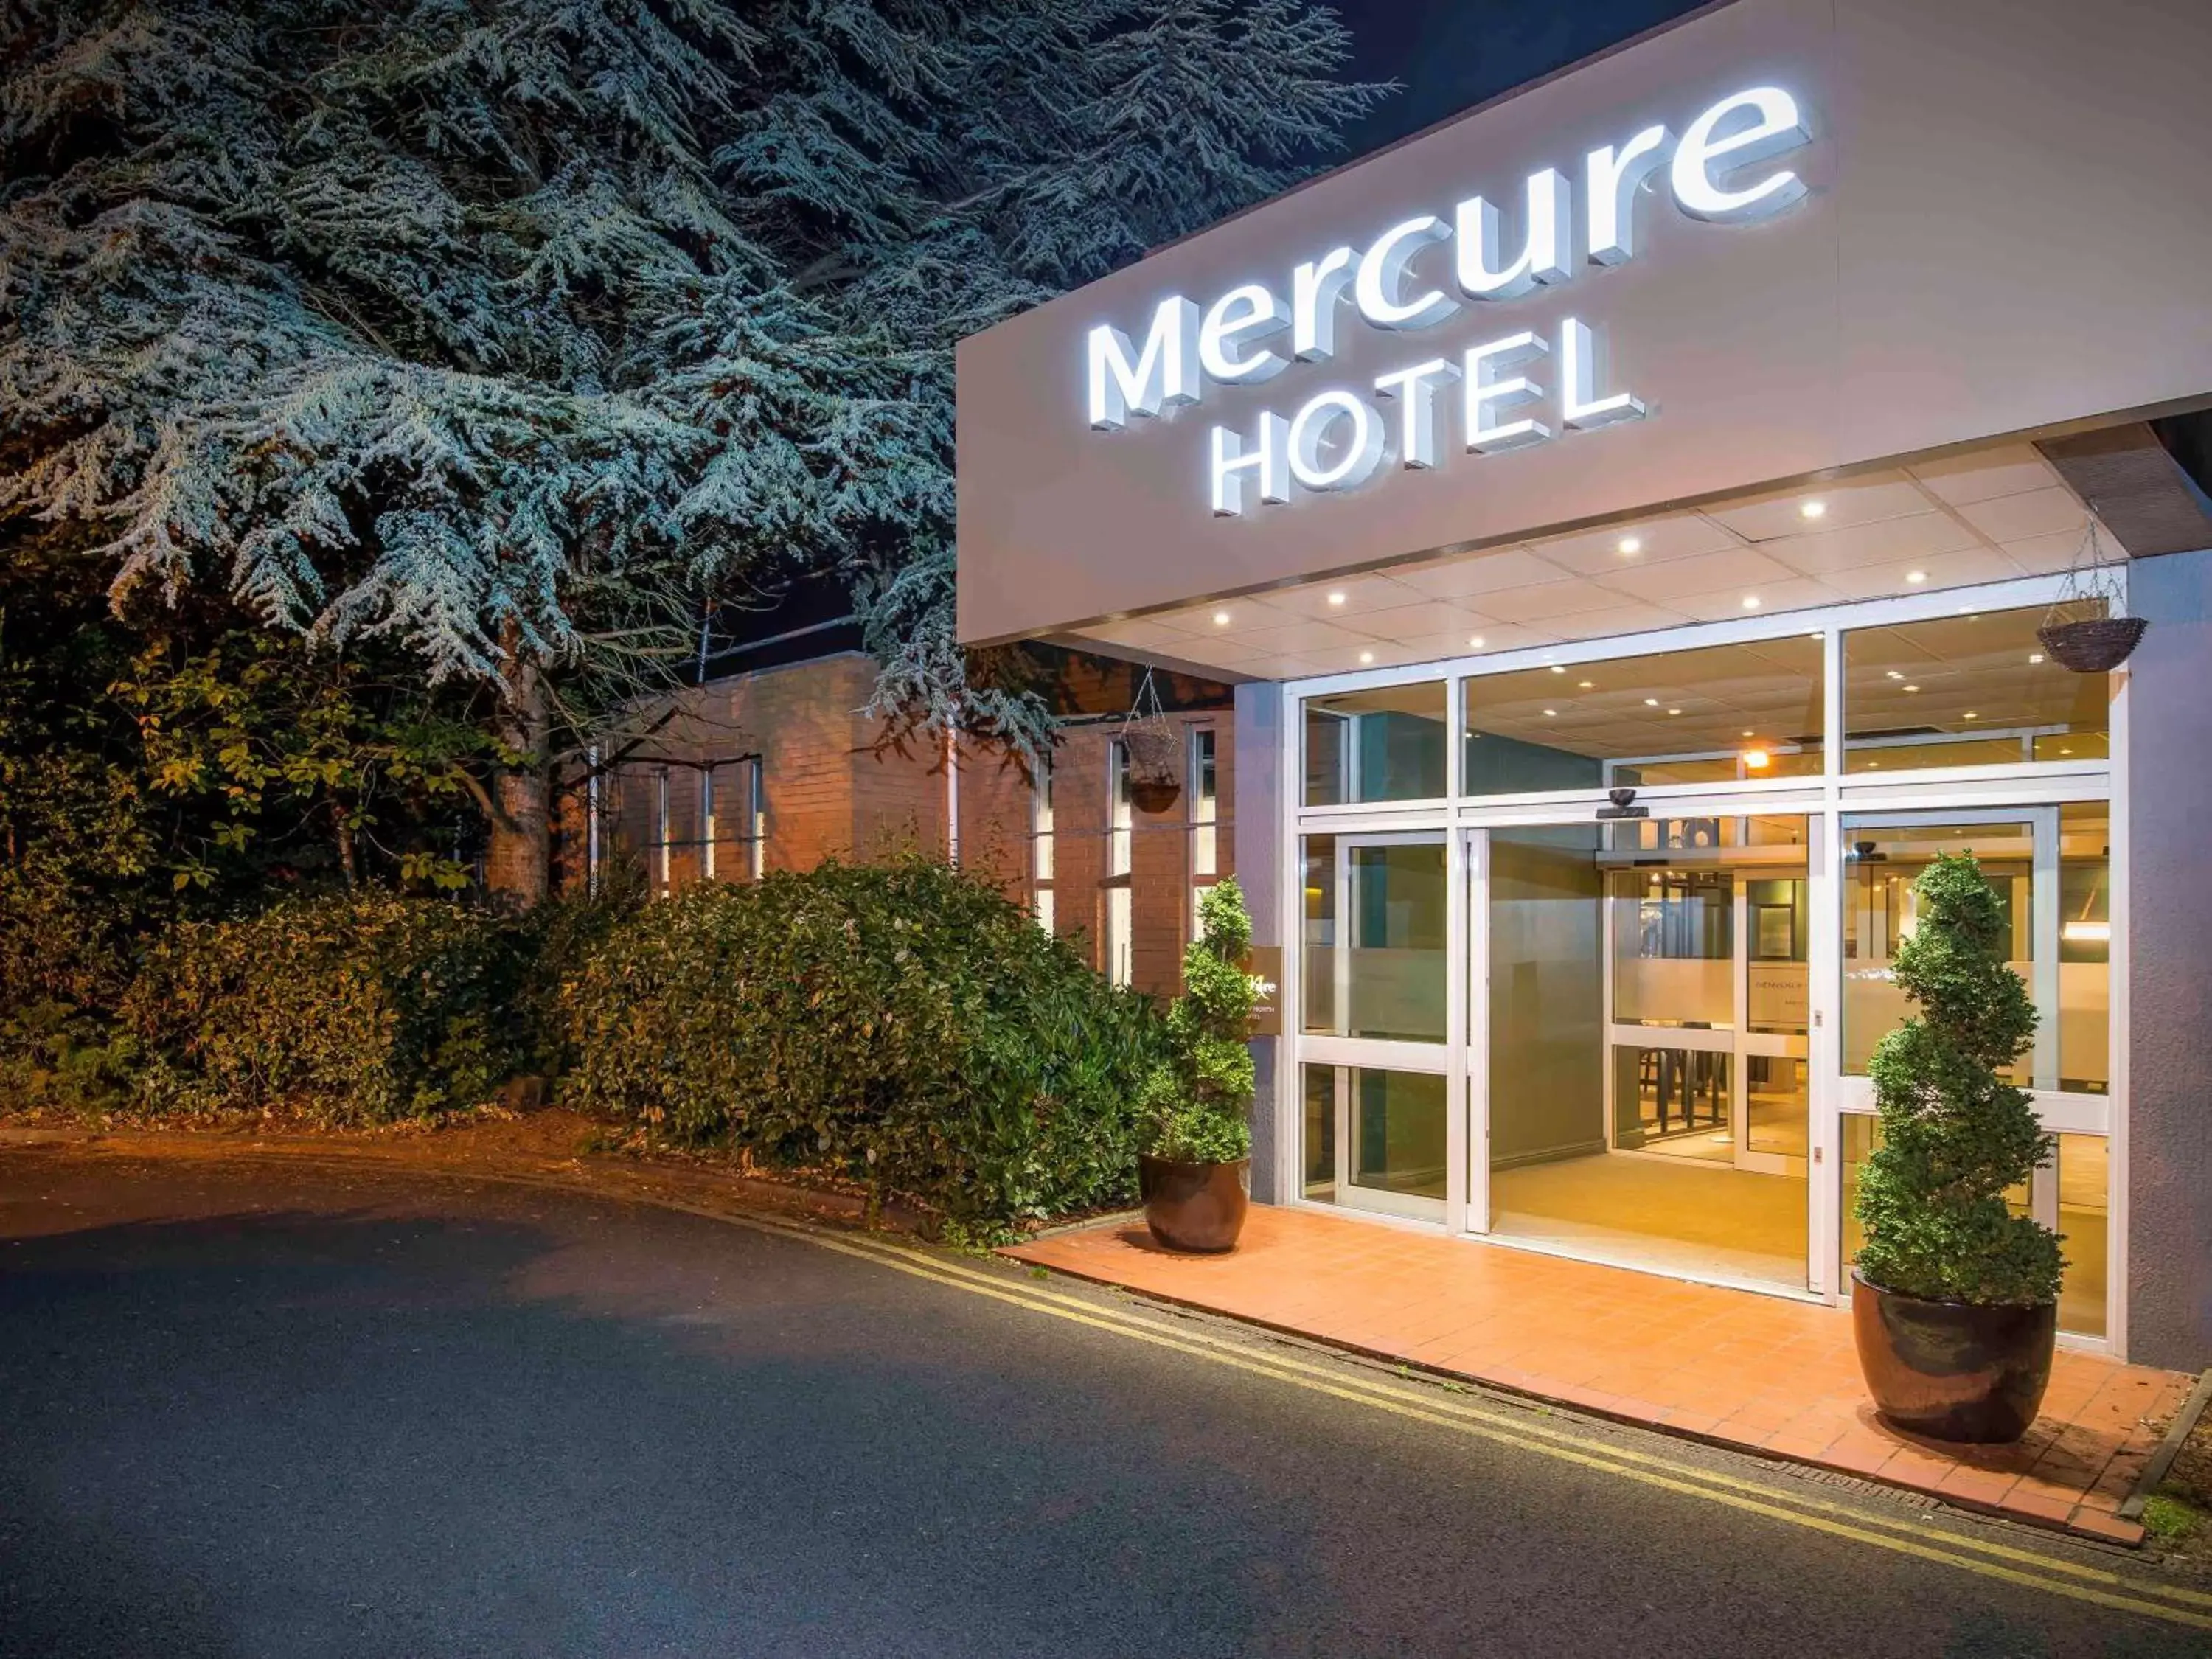 Property building in Mercure Cardiff North Hotel